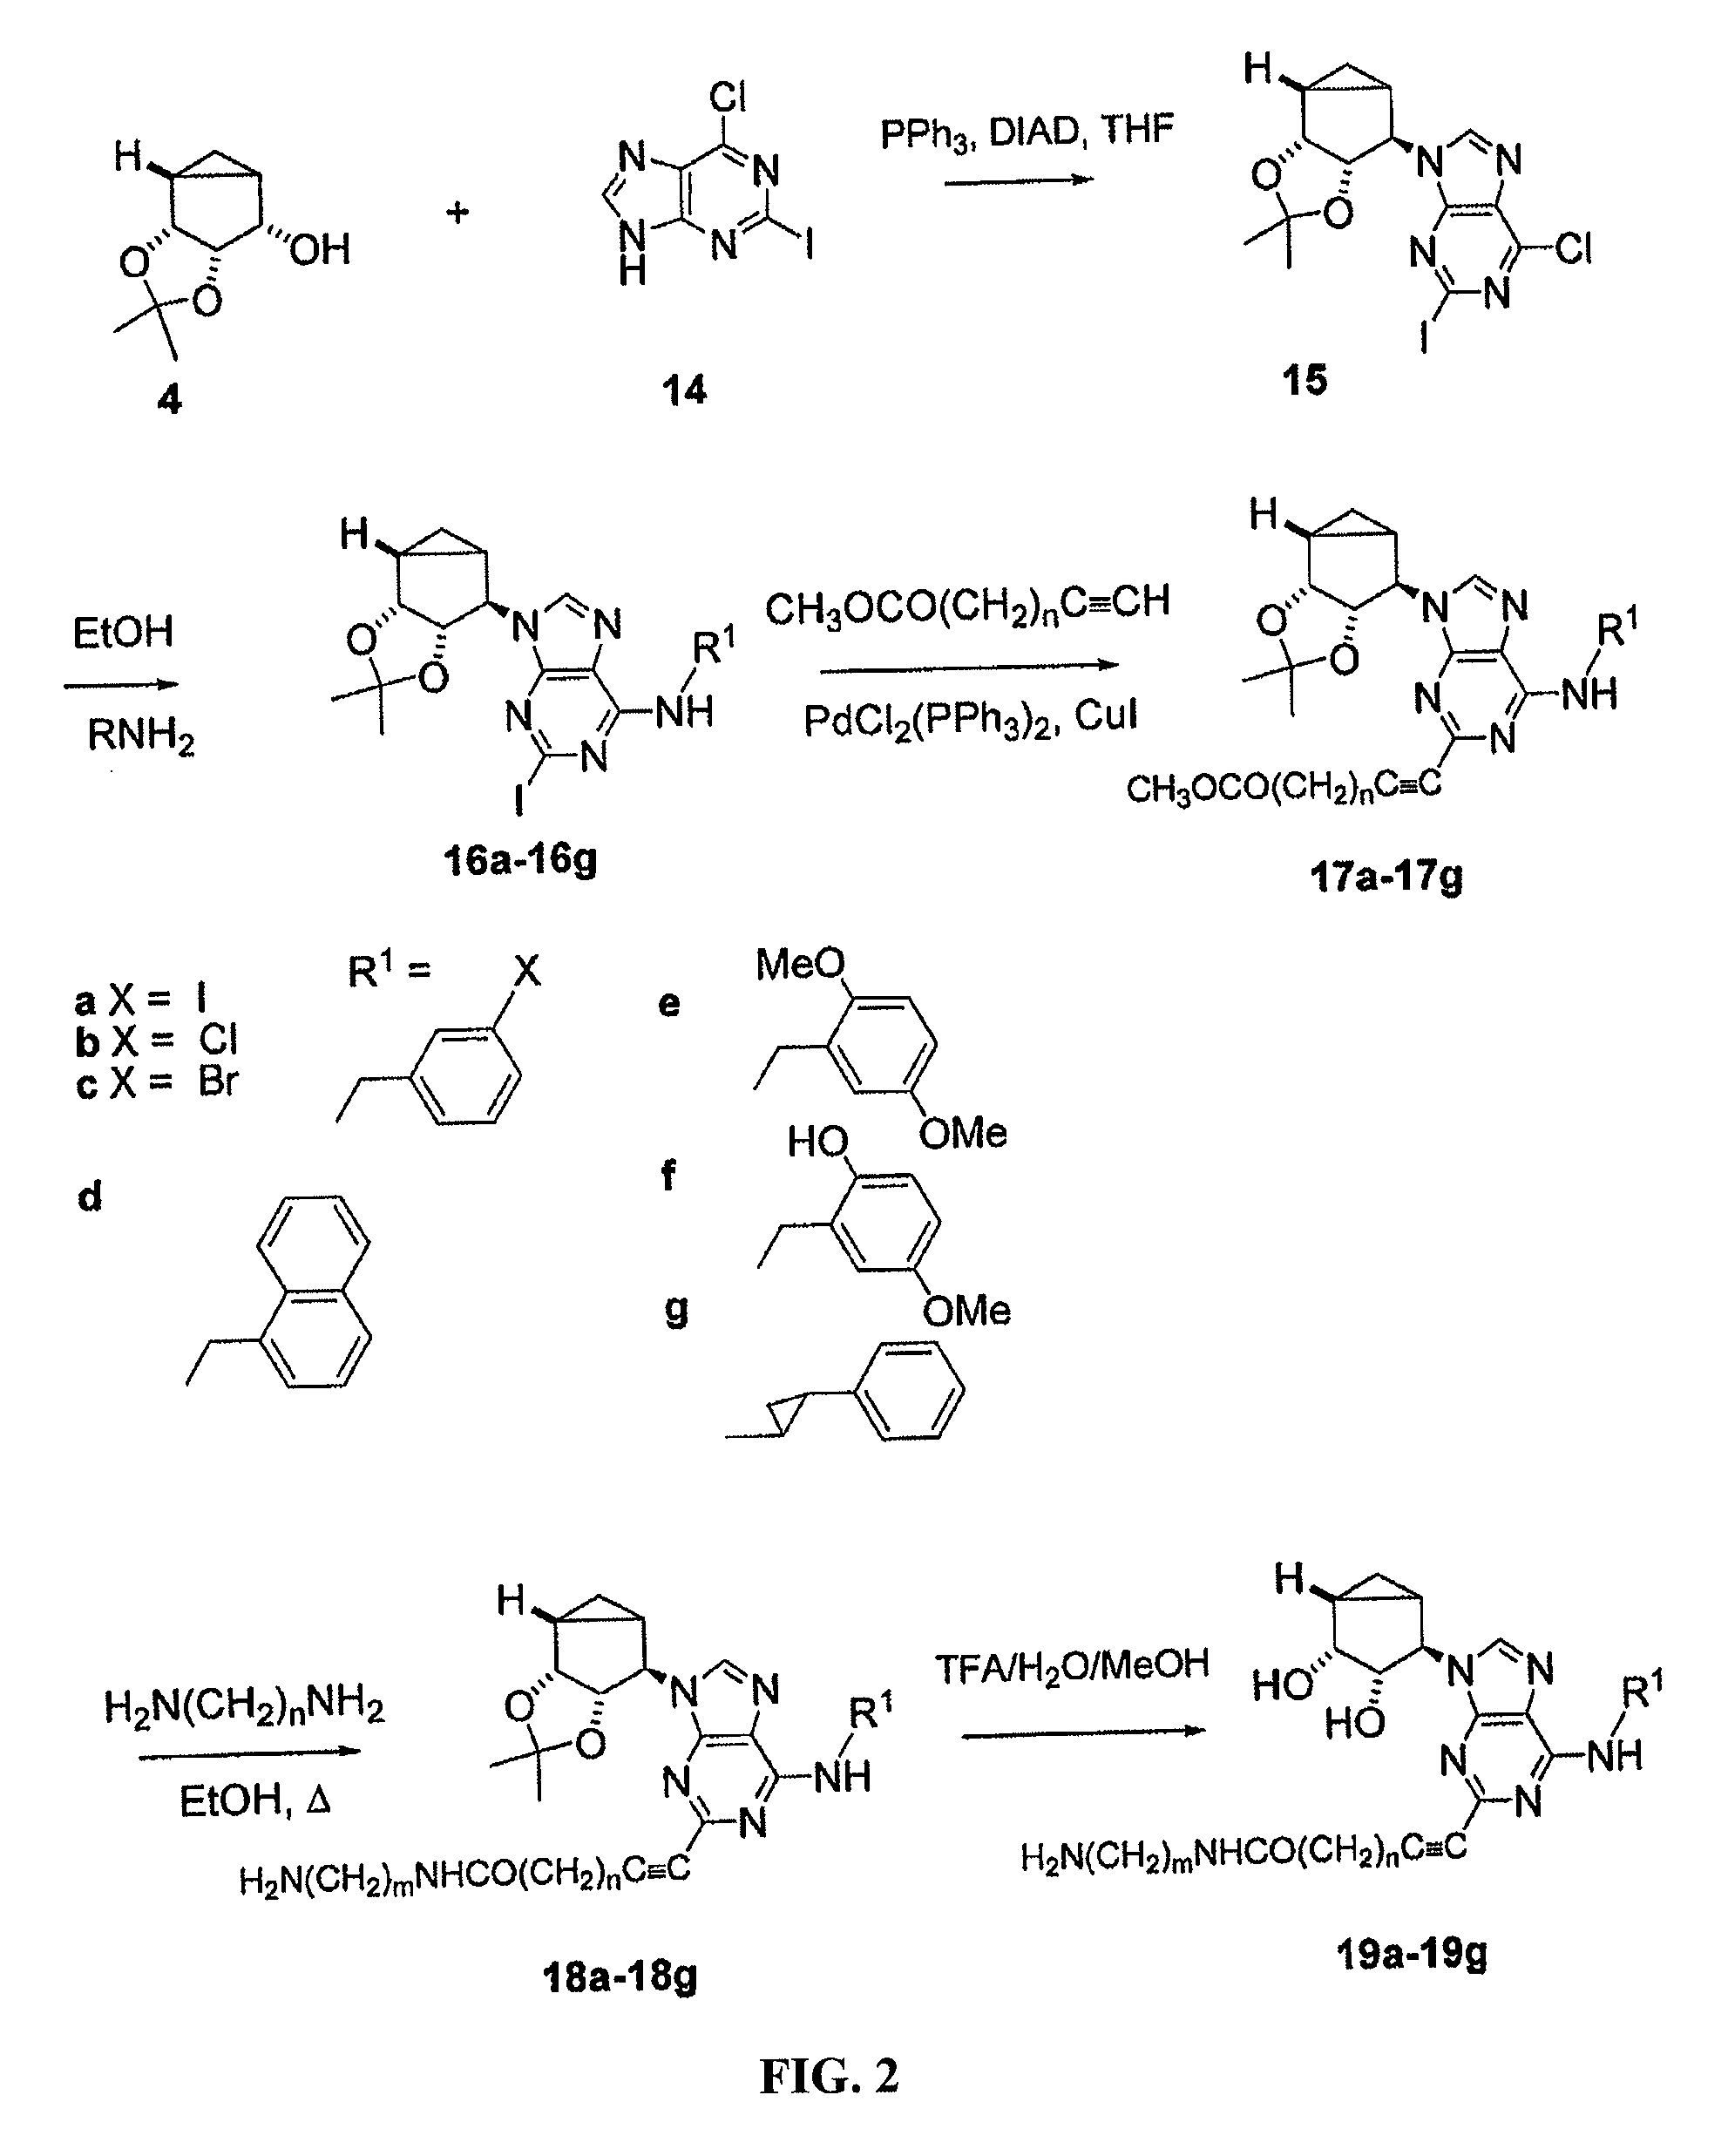 Adenosine receptor agonists, partial agonists, and antagonists